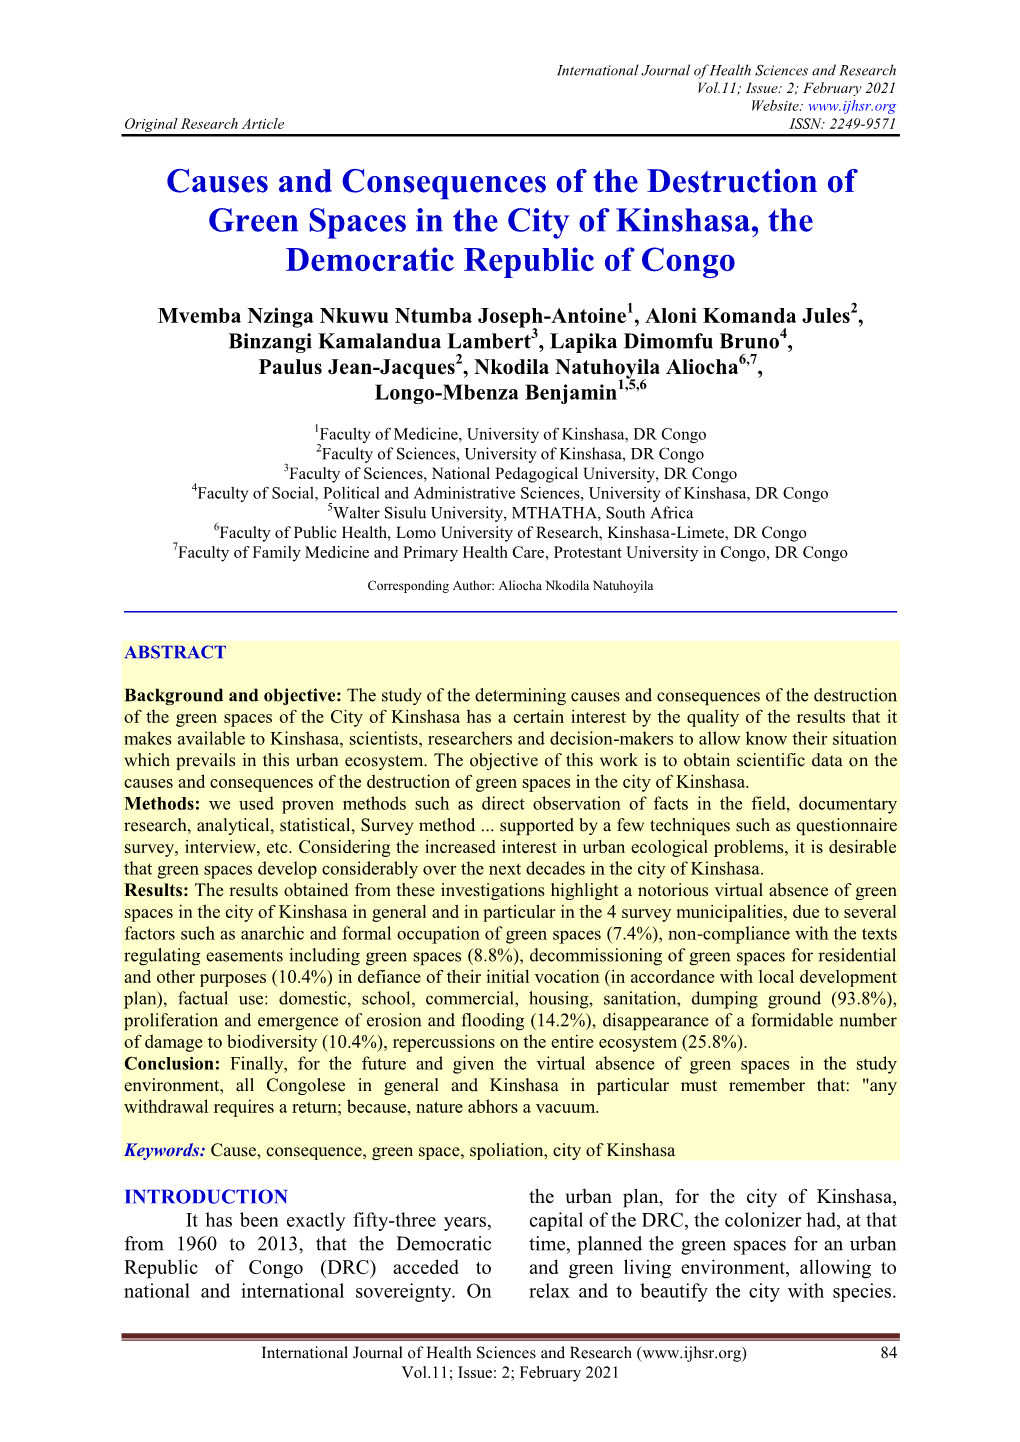 Causes and Consequences of the Destruction of Green Spaces in the City of Kinshasa, the Democratic Republic of Congo